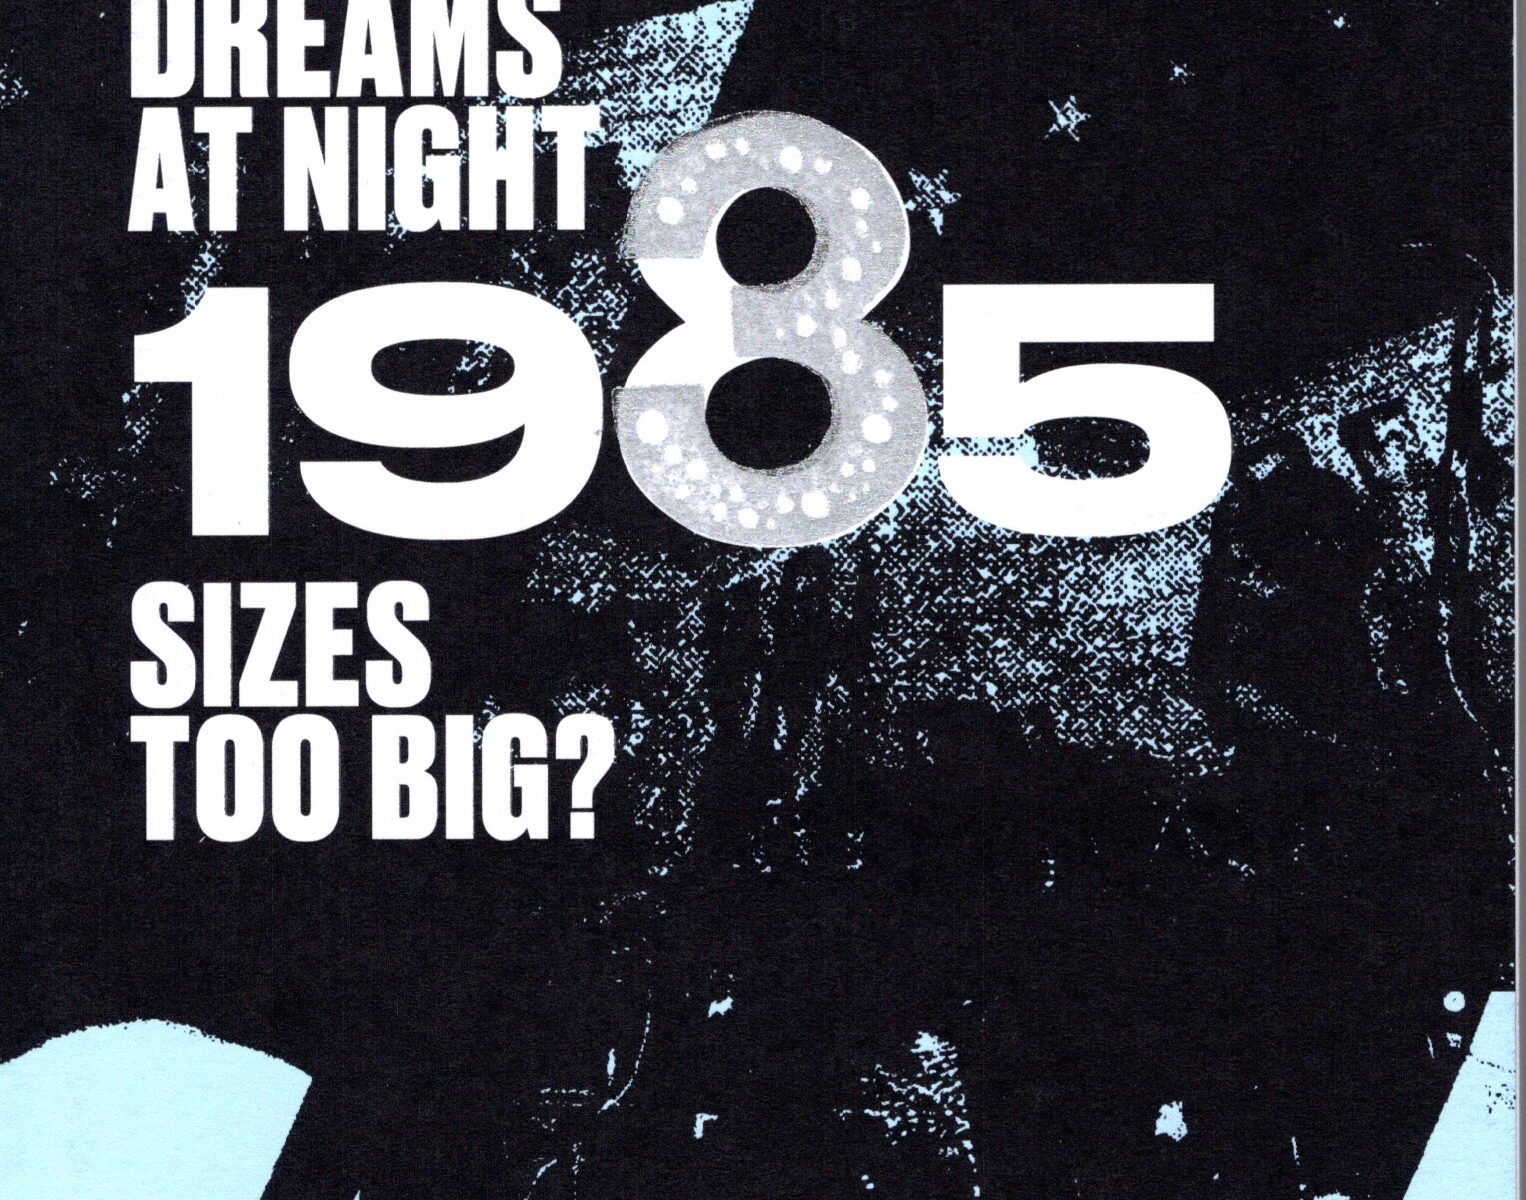 GRAHAM HOLLIDAY – 'A-SIDE: ARE YOUR DREAMS AT NIGHT 1985 SIZE TOO BIG?'  BOOK – JABS